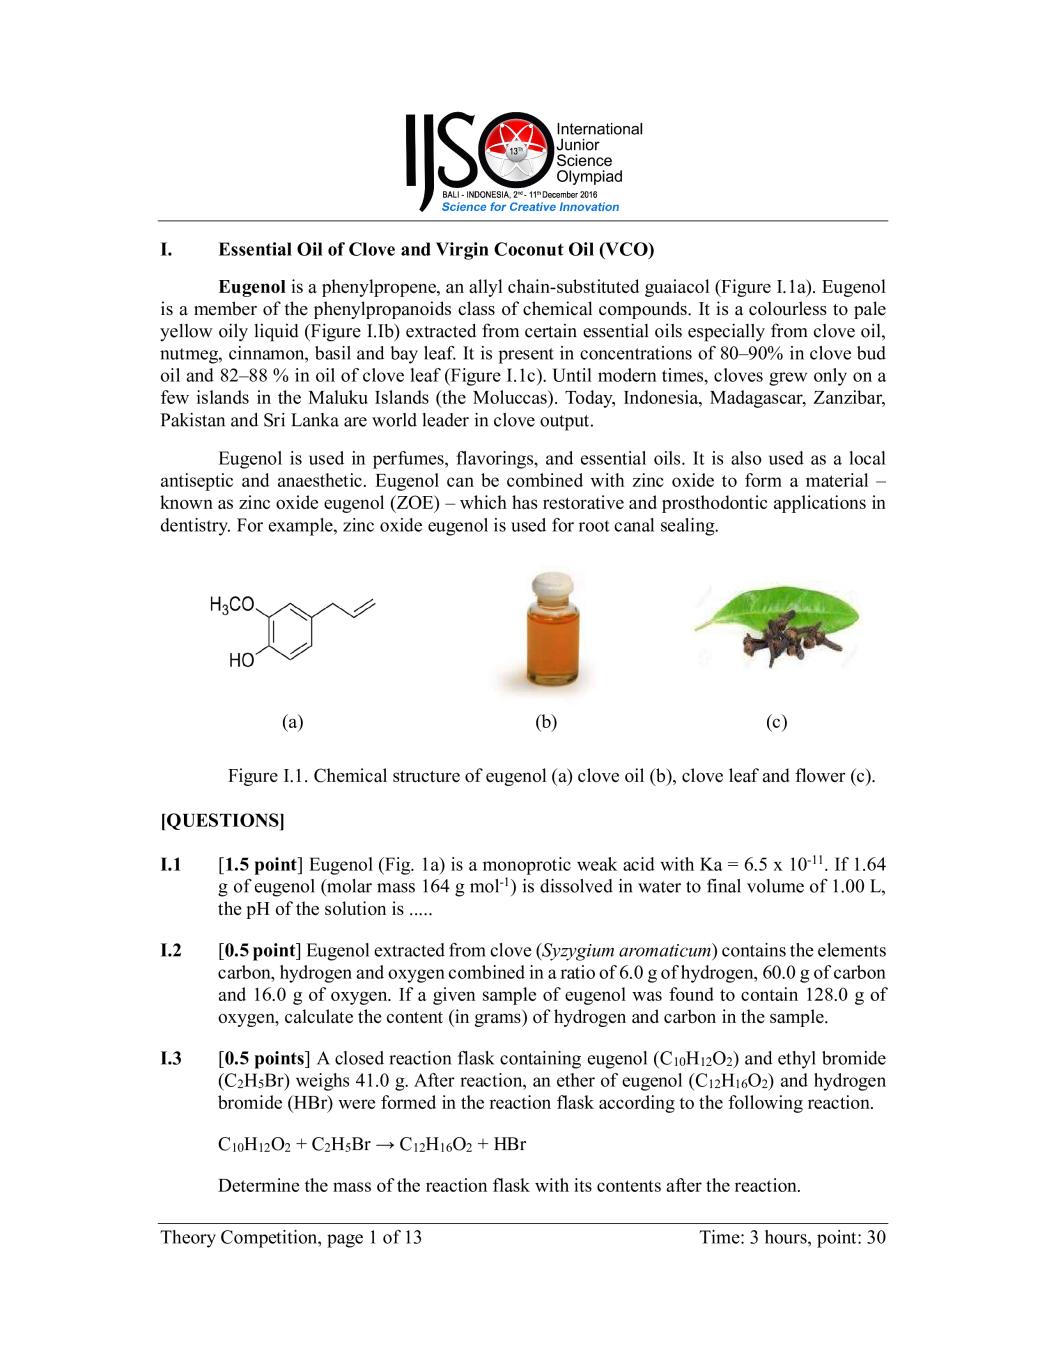 IJSO 2016 THEORY Question Paper, Answer Sheet and Solutions - Page 1